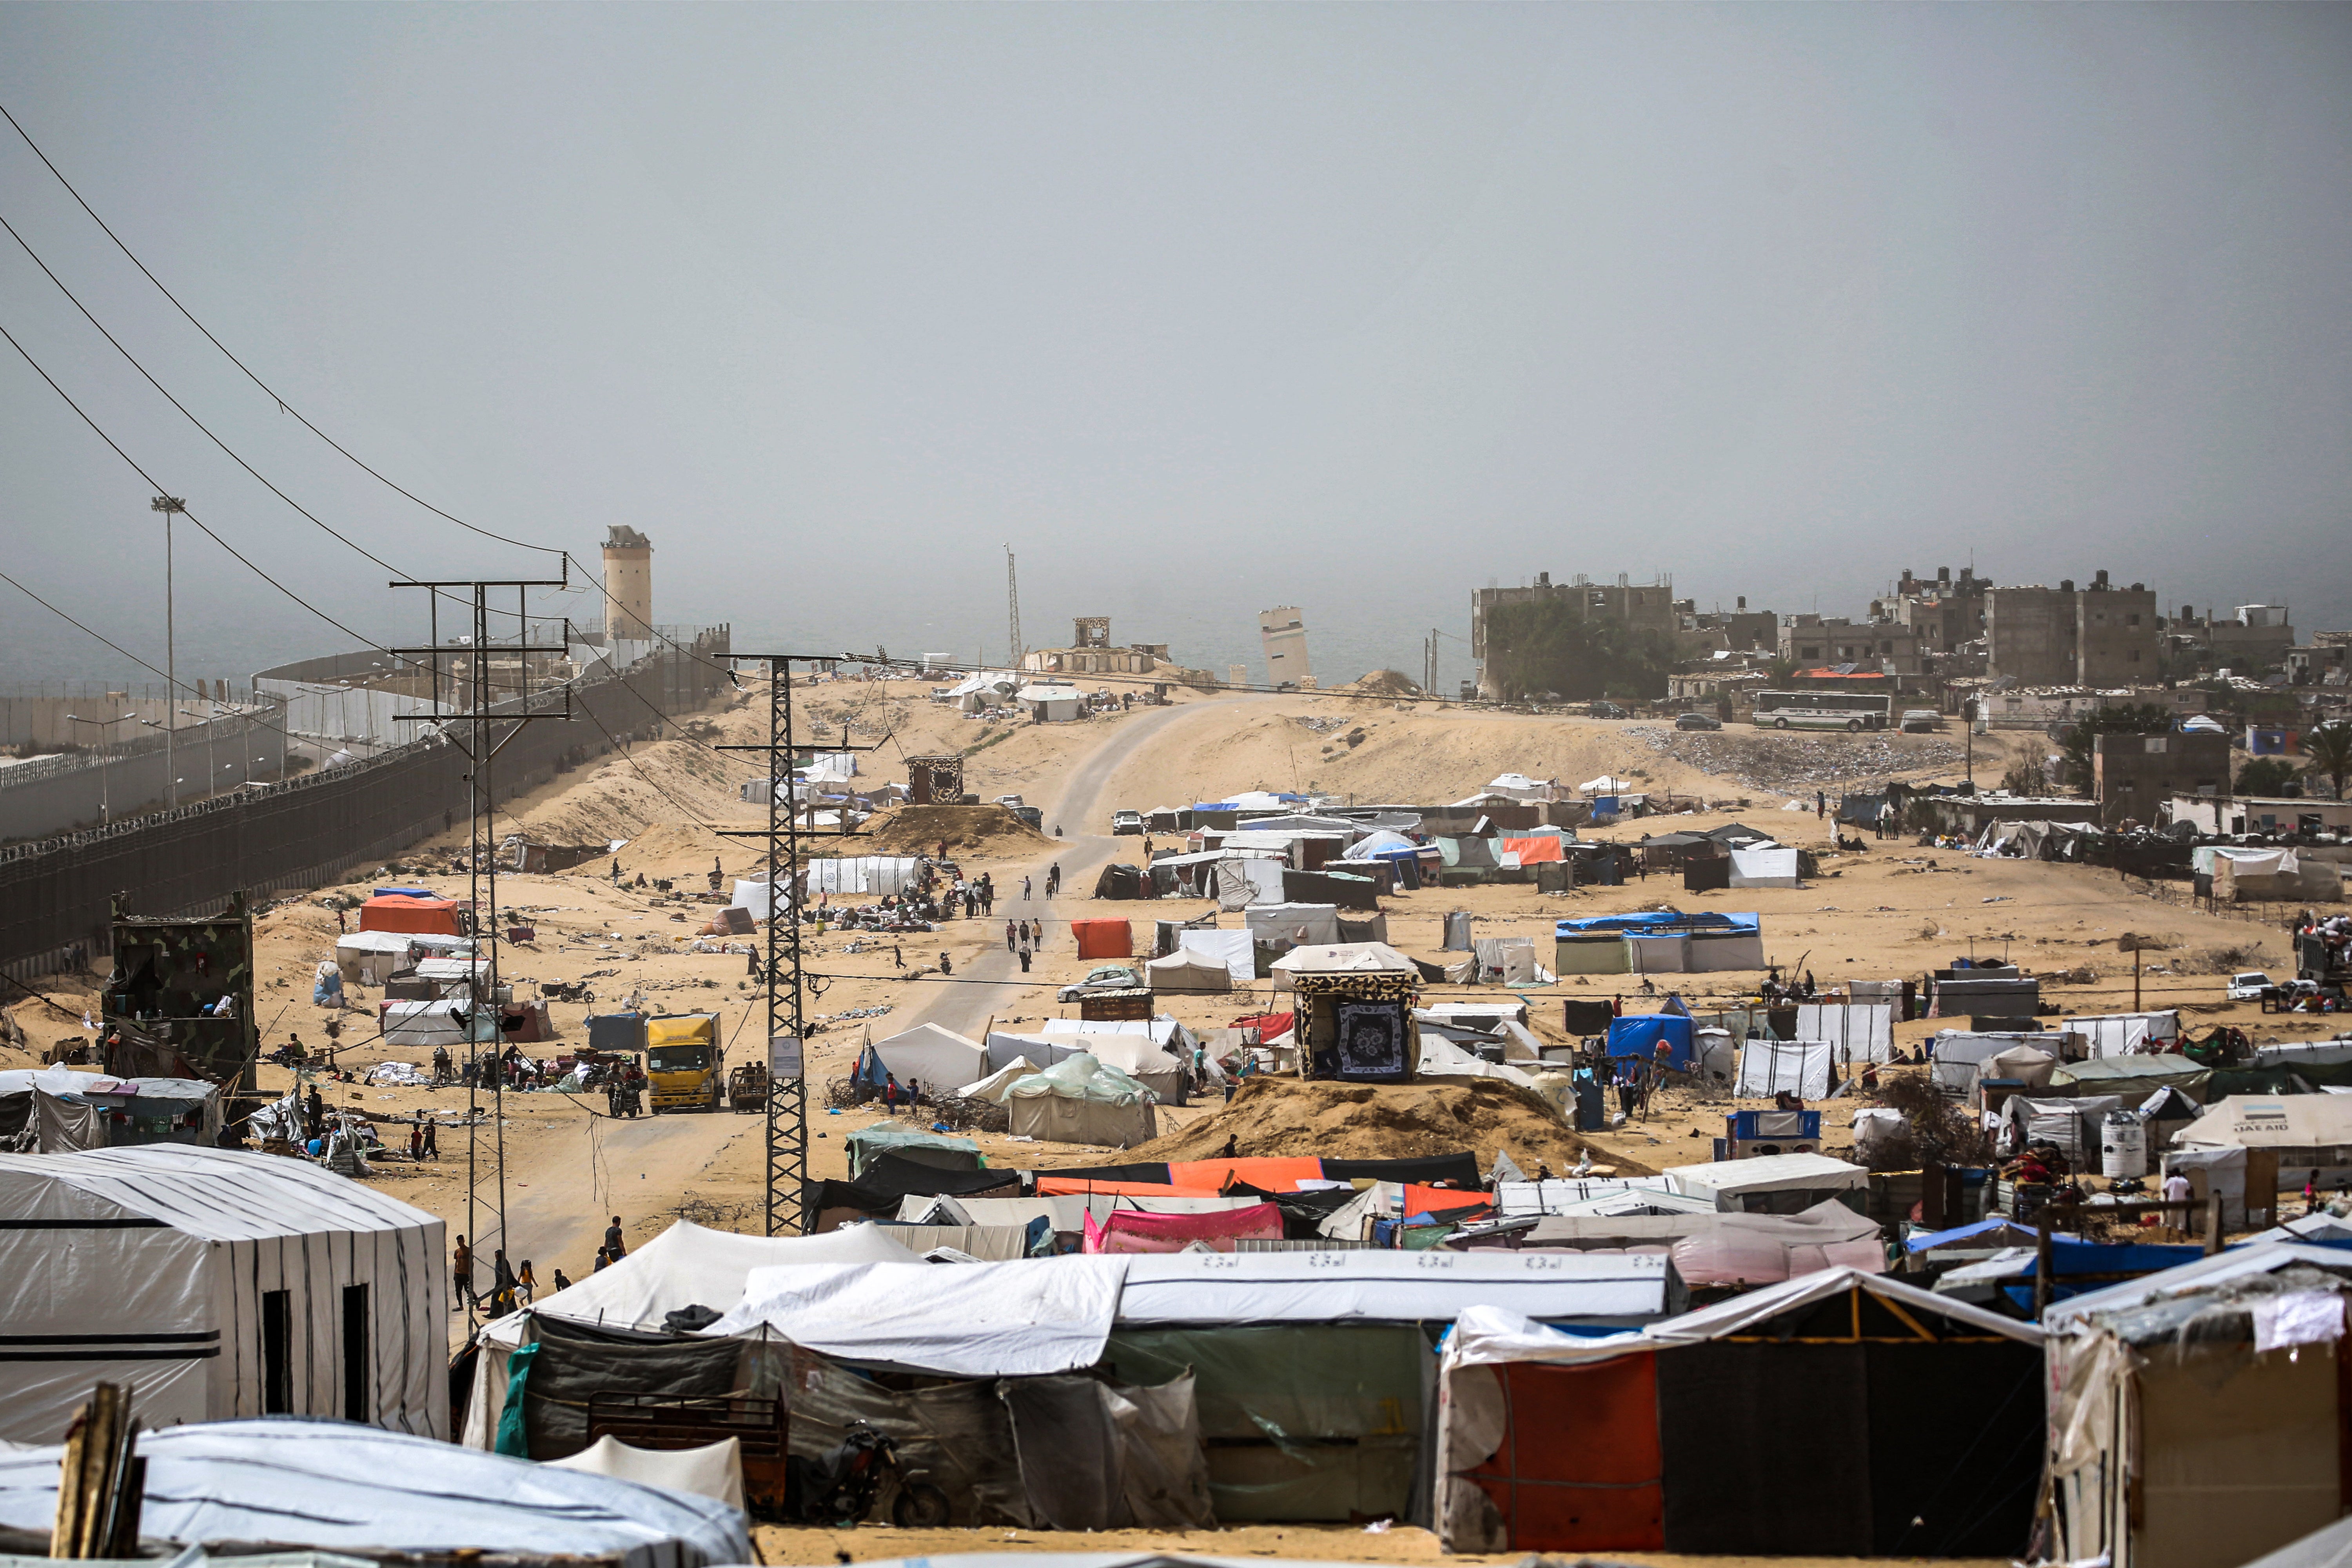 Tent encampments housing displaced Palestinians in Rafah, in the southern Gaza Strip, by the border fence with Egypt